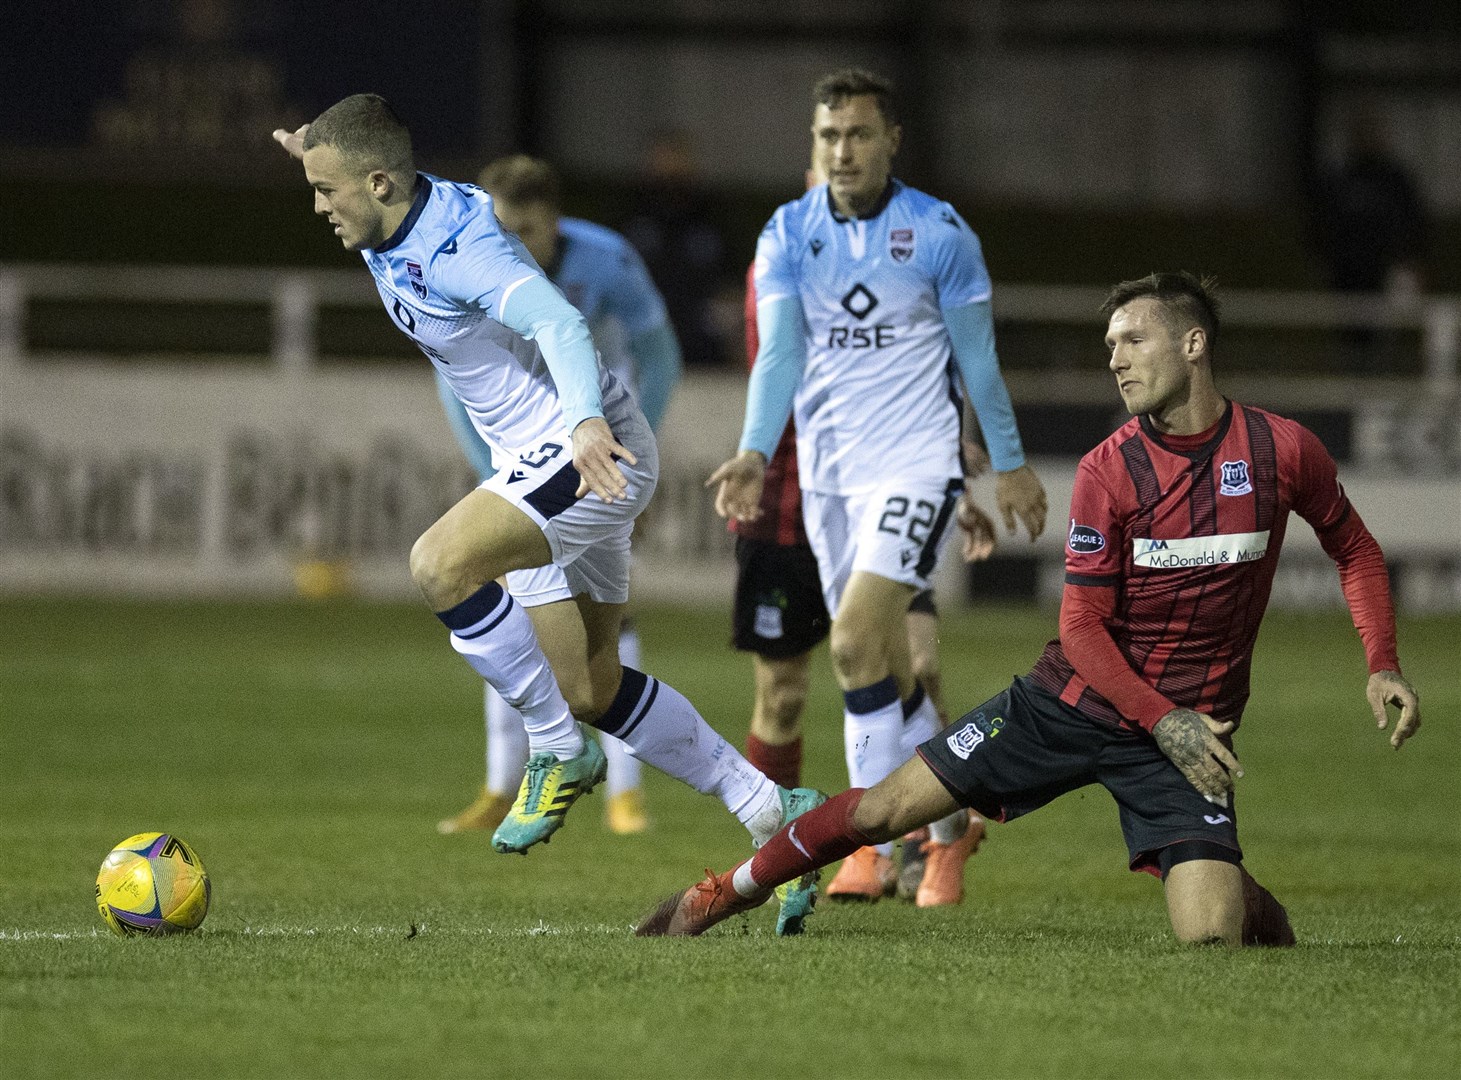 Michael O' Connor in action for Ross County against Elgin City last month. Picture: Ken Macpherson